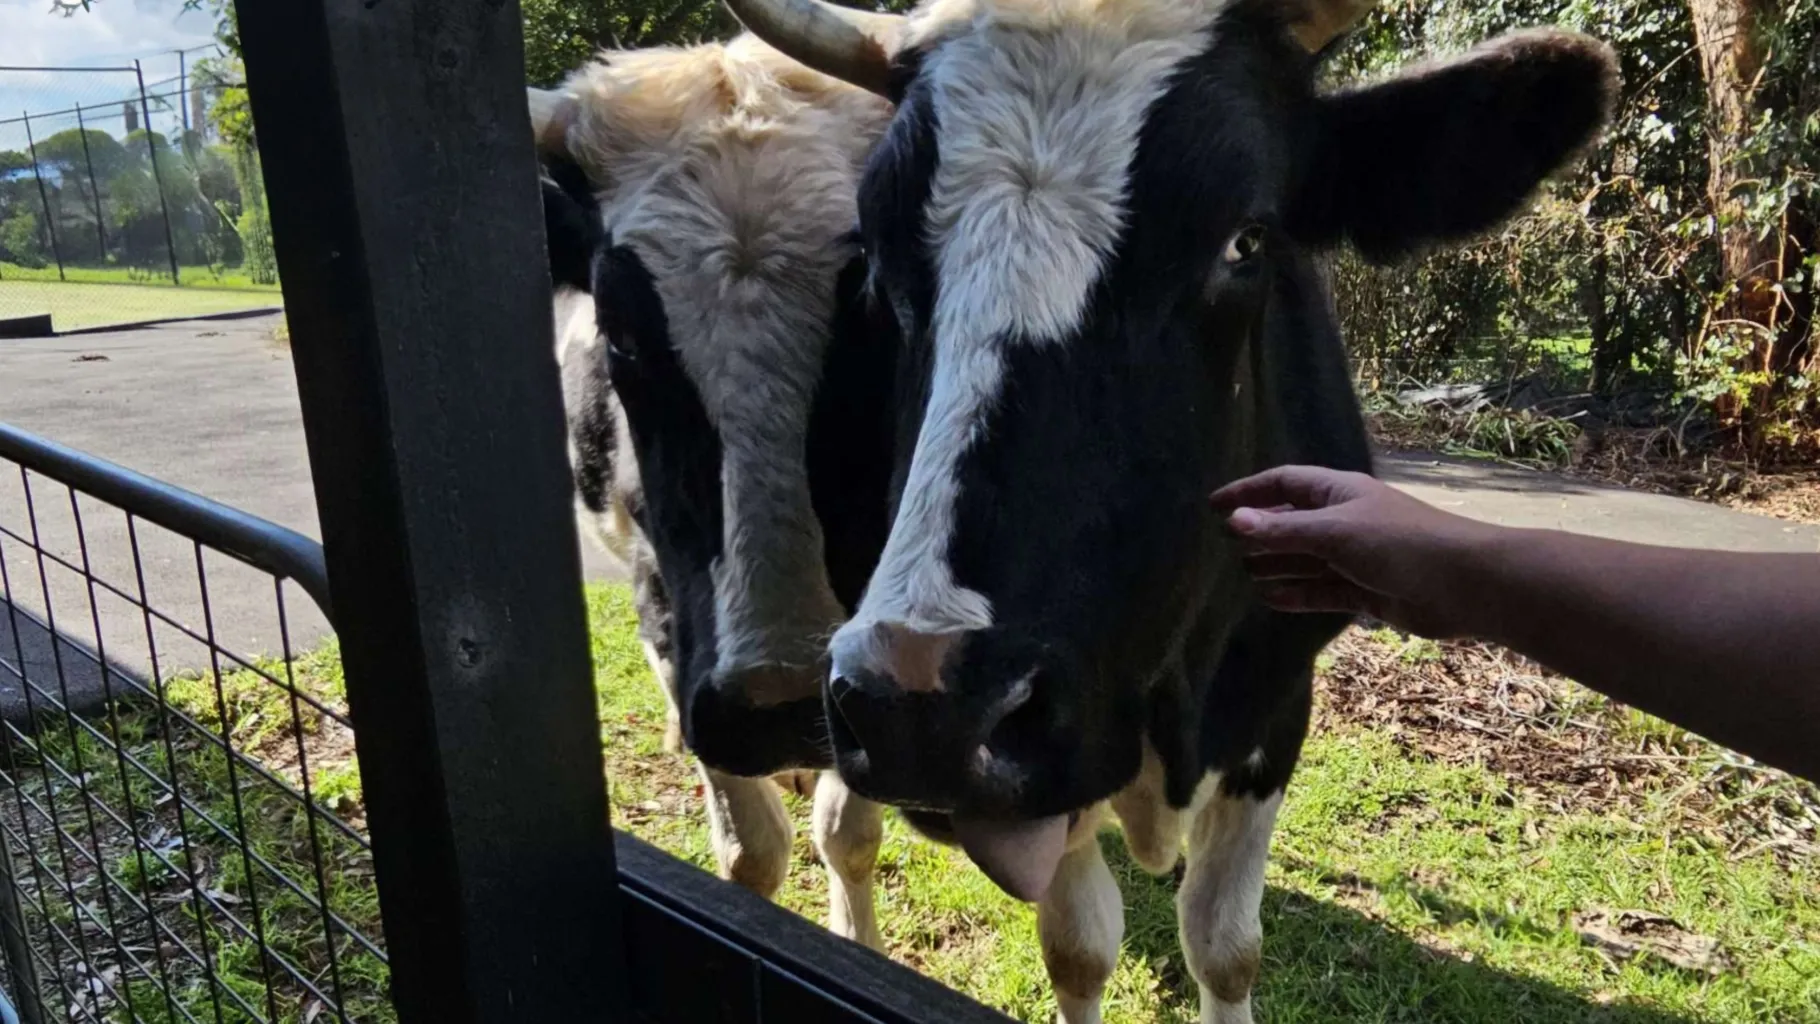 Image of two cows named Brutus and Buster